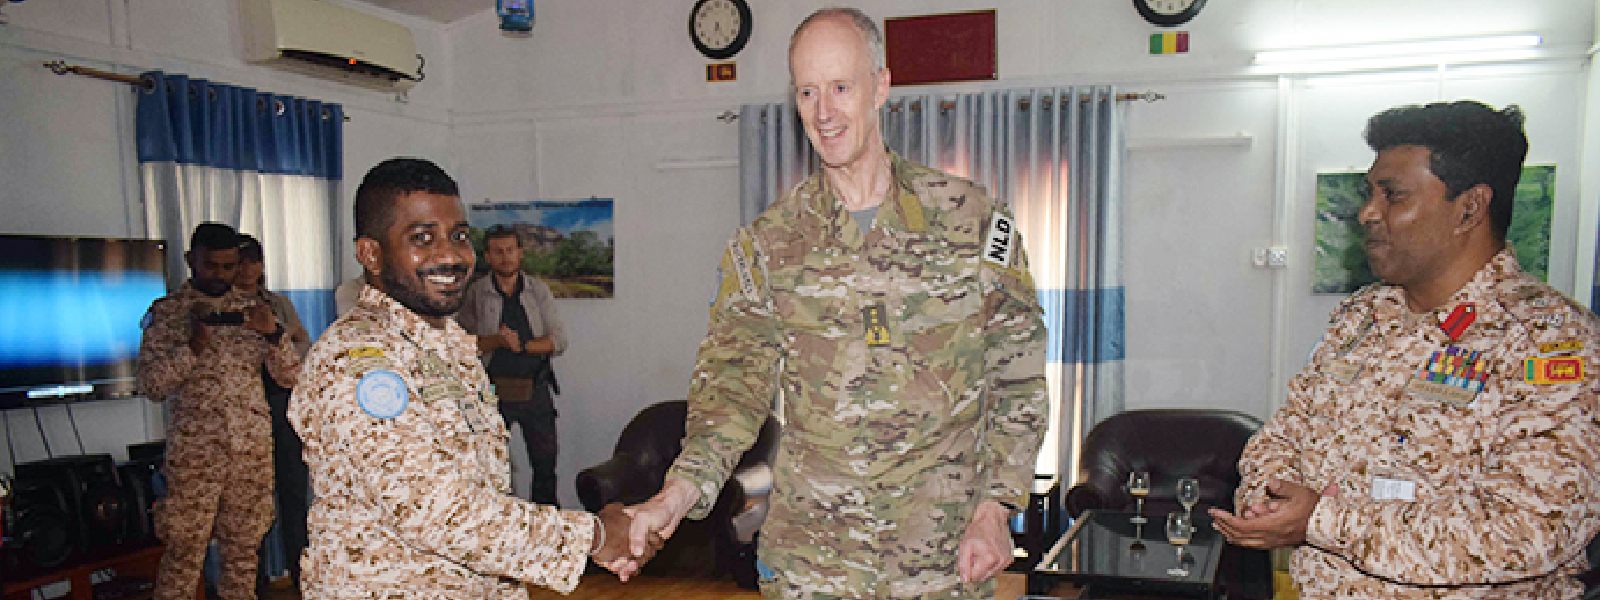 Army Troops in Mali awarded Special Service Medal for defusing IEDs